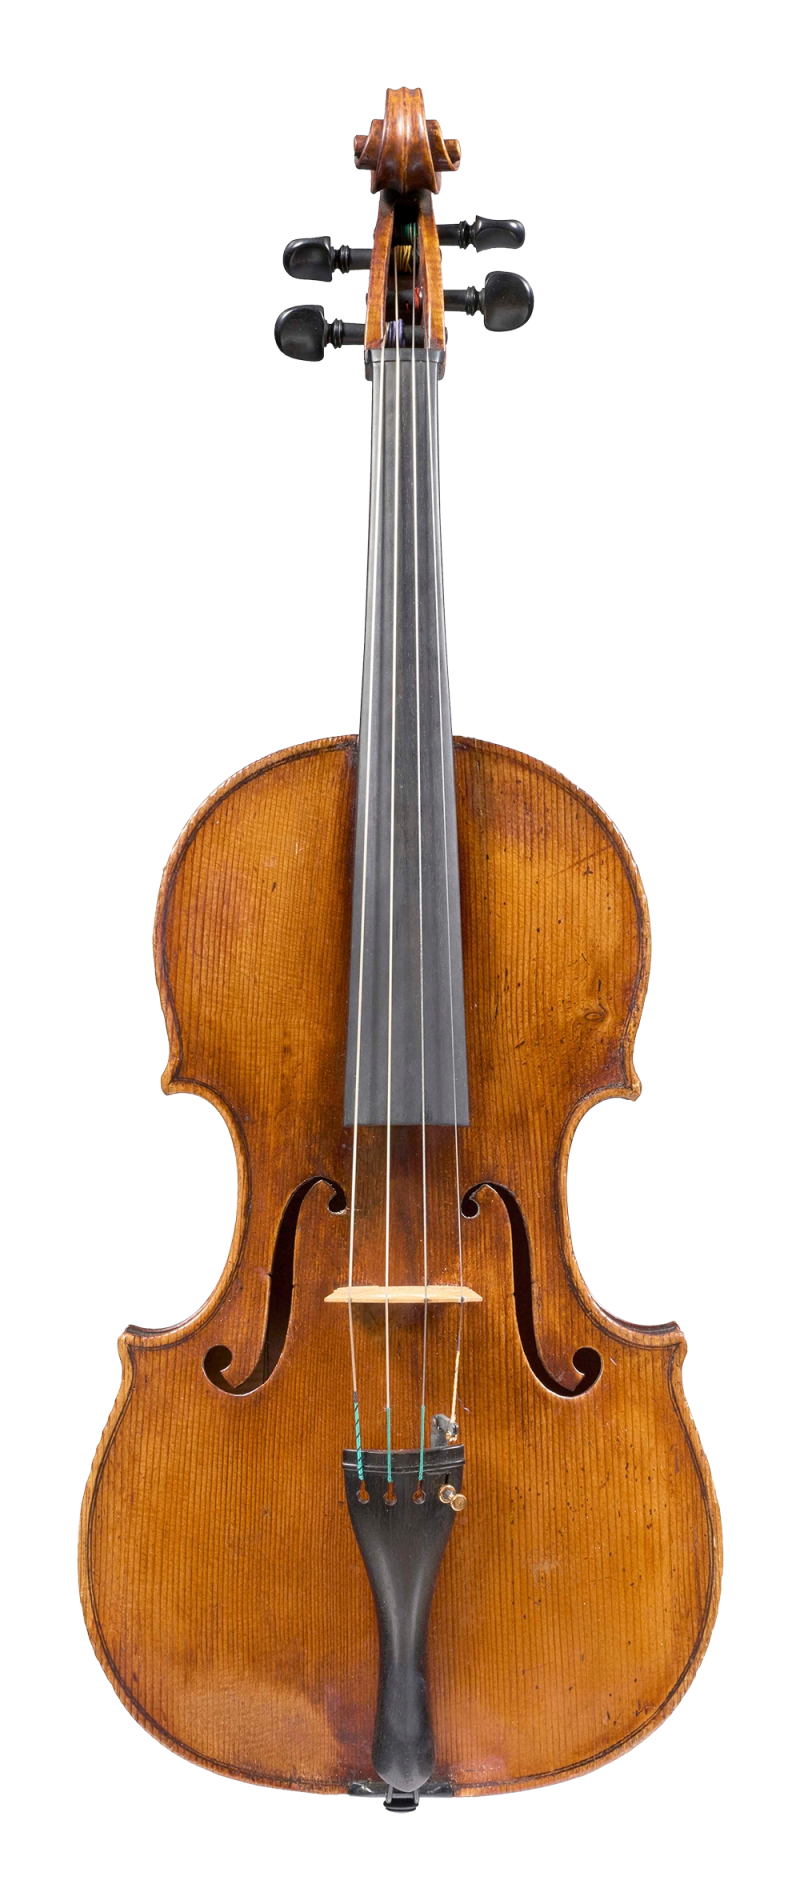 Front of a viola by Gaetano Sgarabotto, circa 1920. This viola has a full and warm sound with a singing A string and an open bass register.